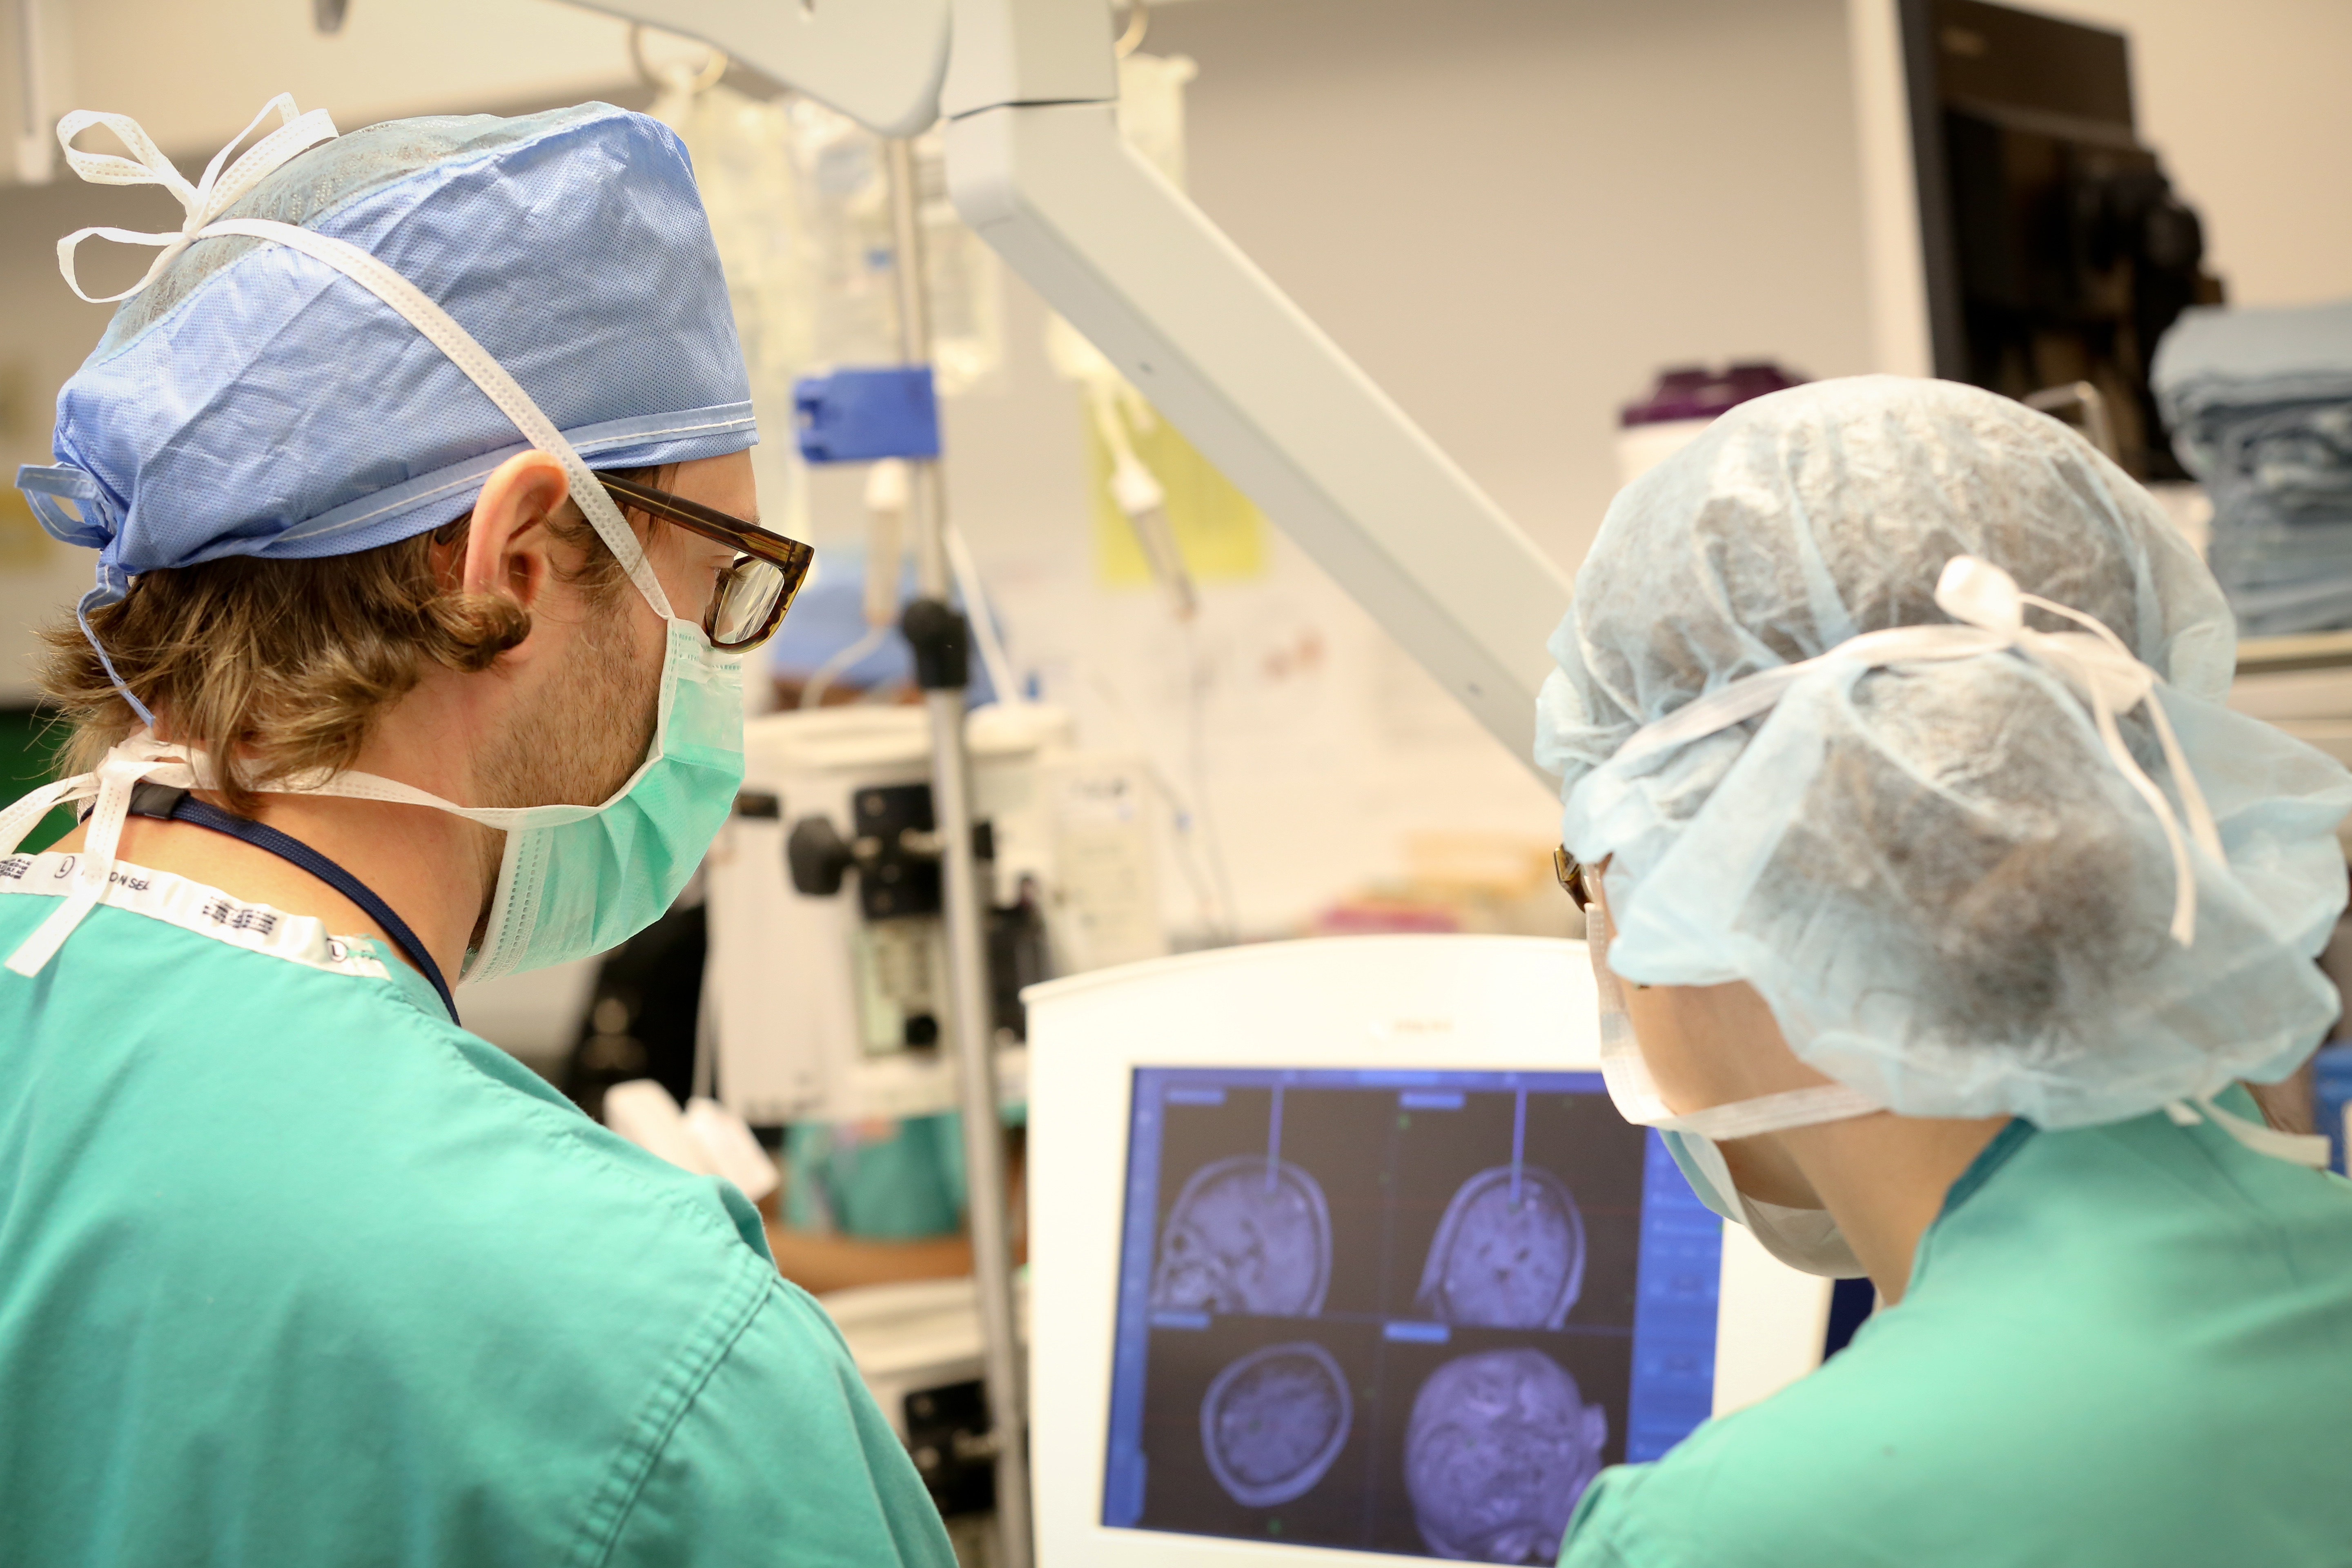 A male neurosurgeon and female neurosurgical team member look at four MRIs of a patient’s brain on a monitor. They are both wearing scrubs, surgical masks and glasses. Surgical equipment is visible in the background.